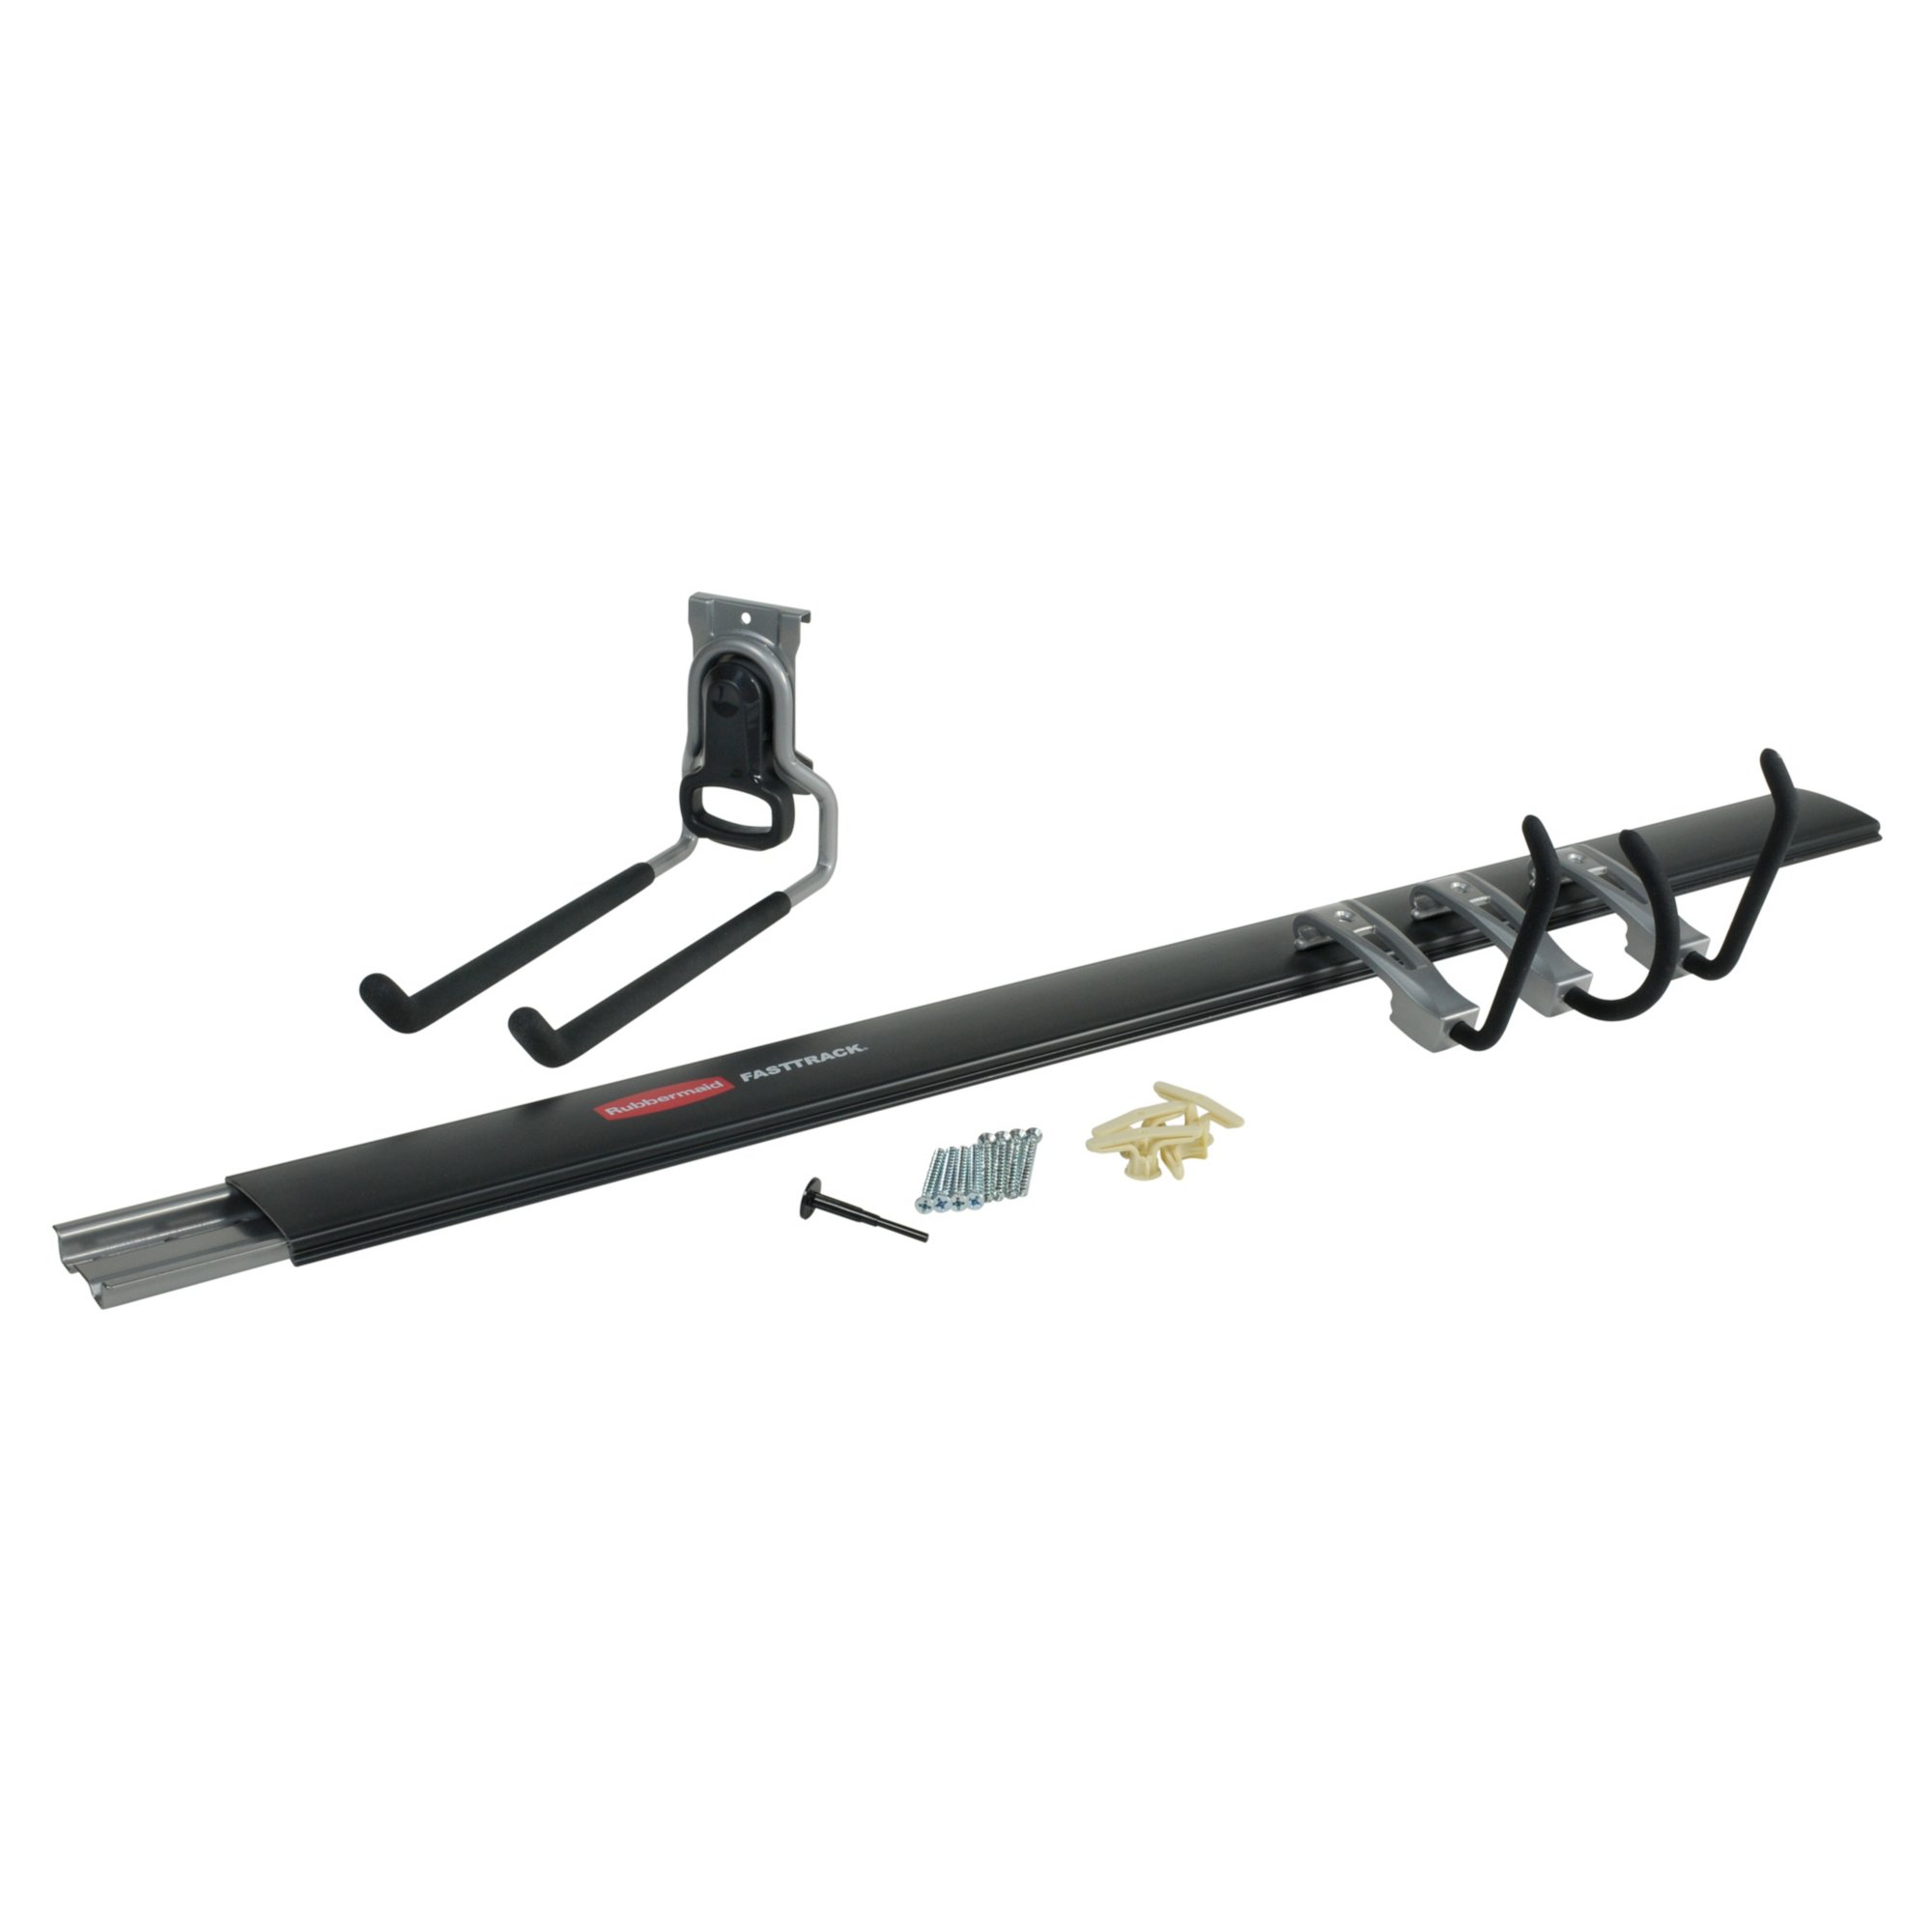 Rubbermaid 1784415 48-Inch Black FastTrack Rail And Cover at